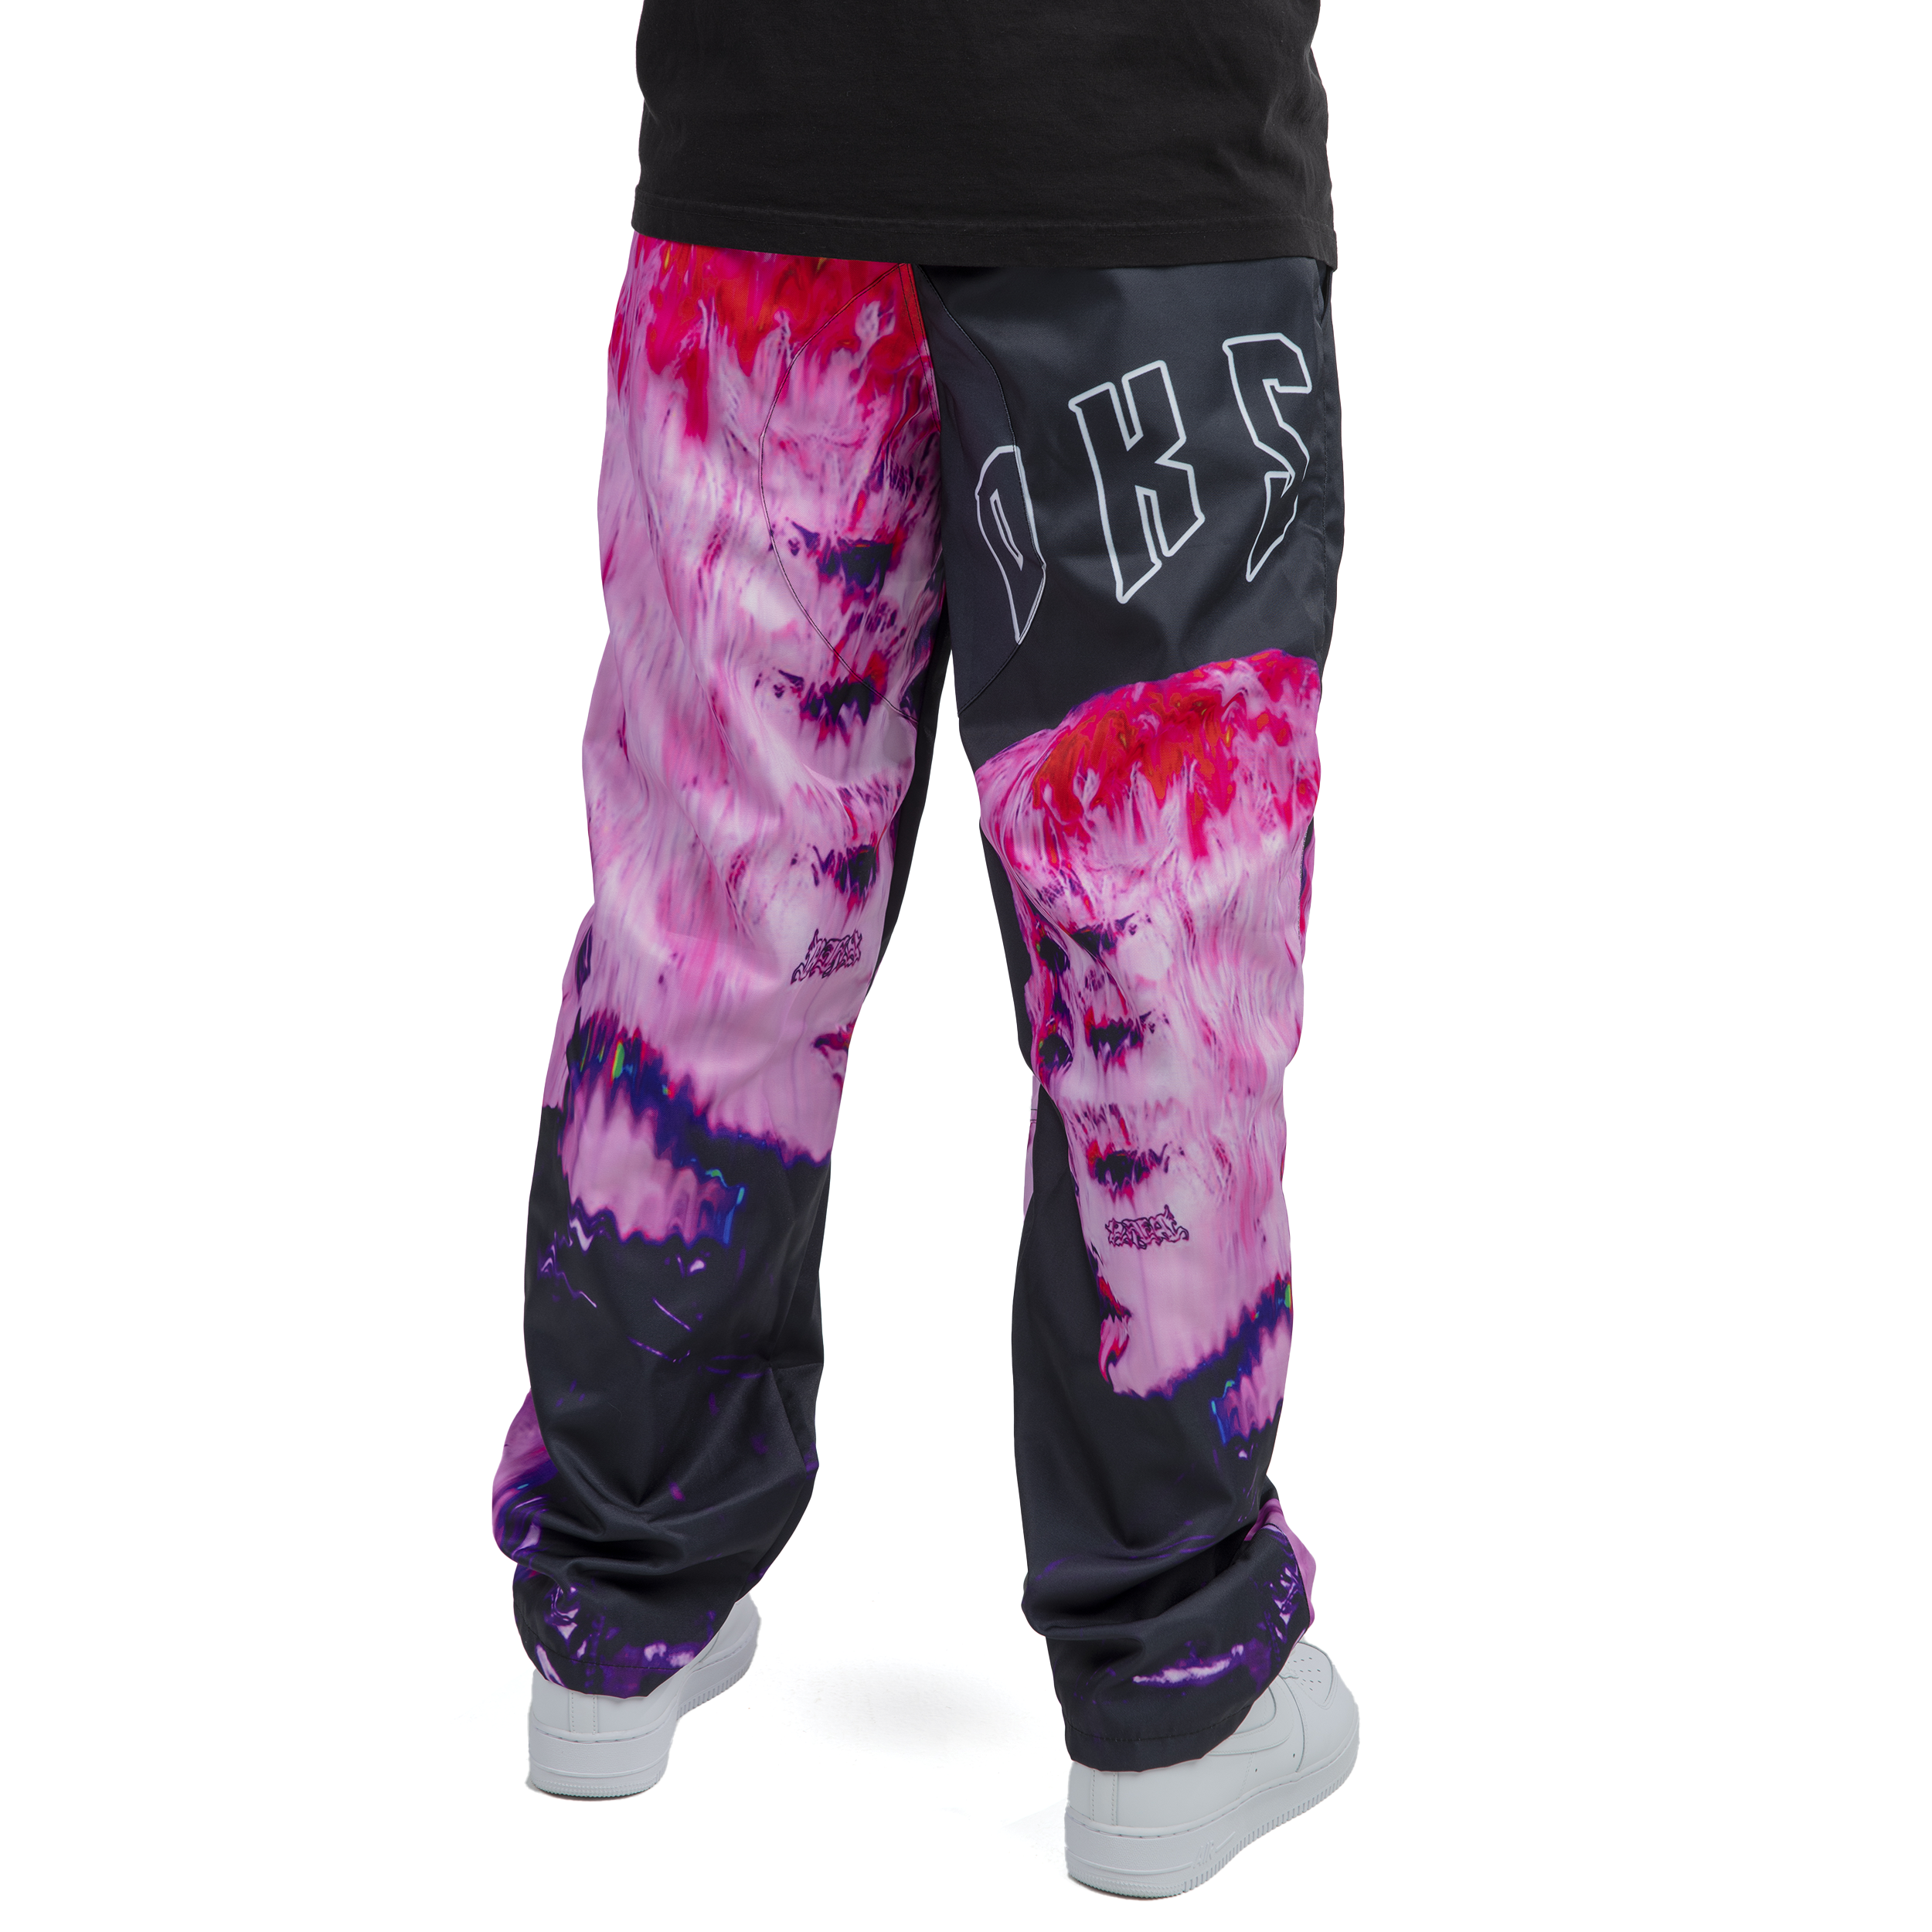 DKS "Abstract V2" Cargo Pants